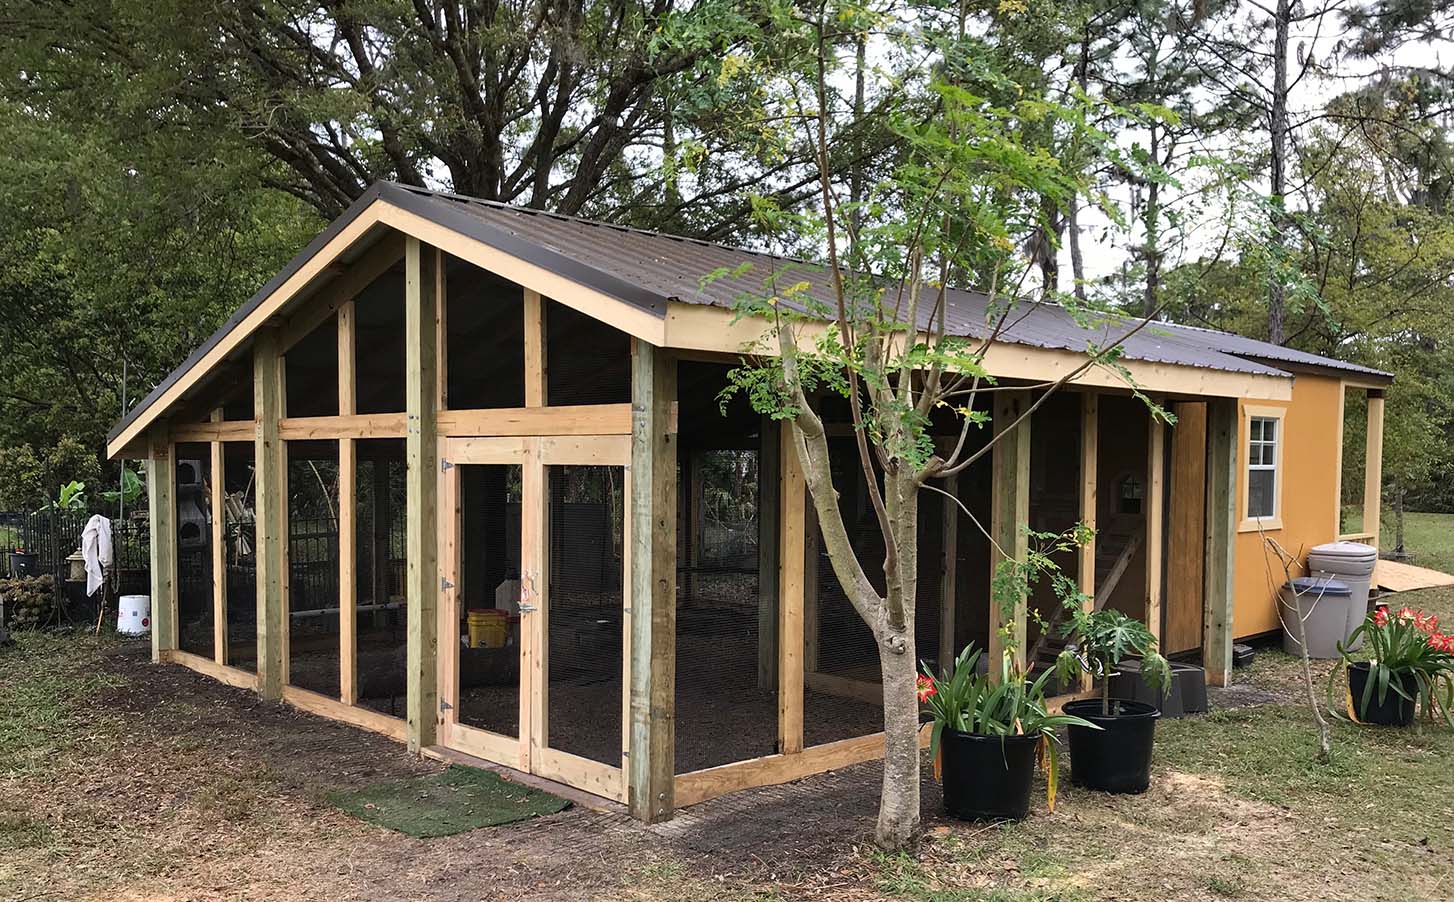 Custom chicken run built on converted shed in Orlando, Florida